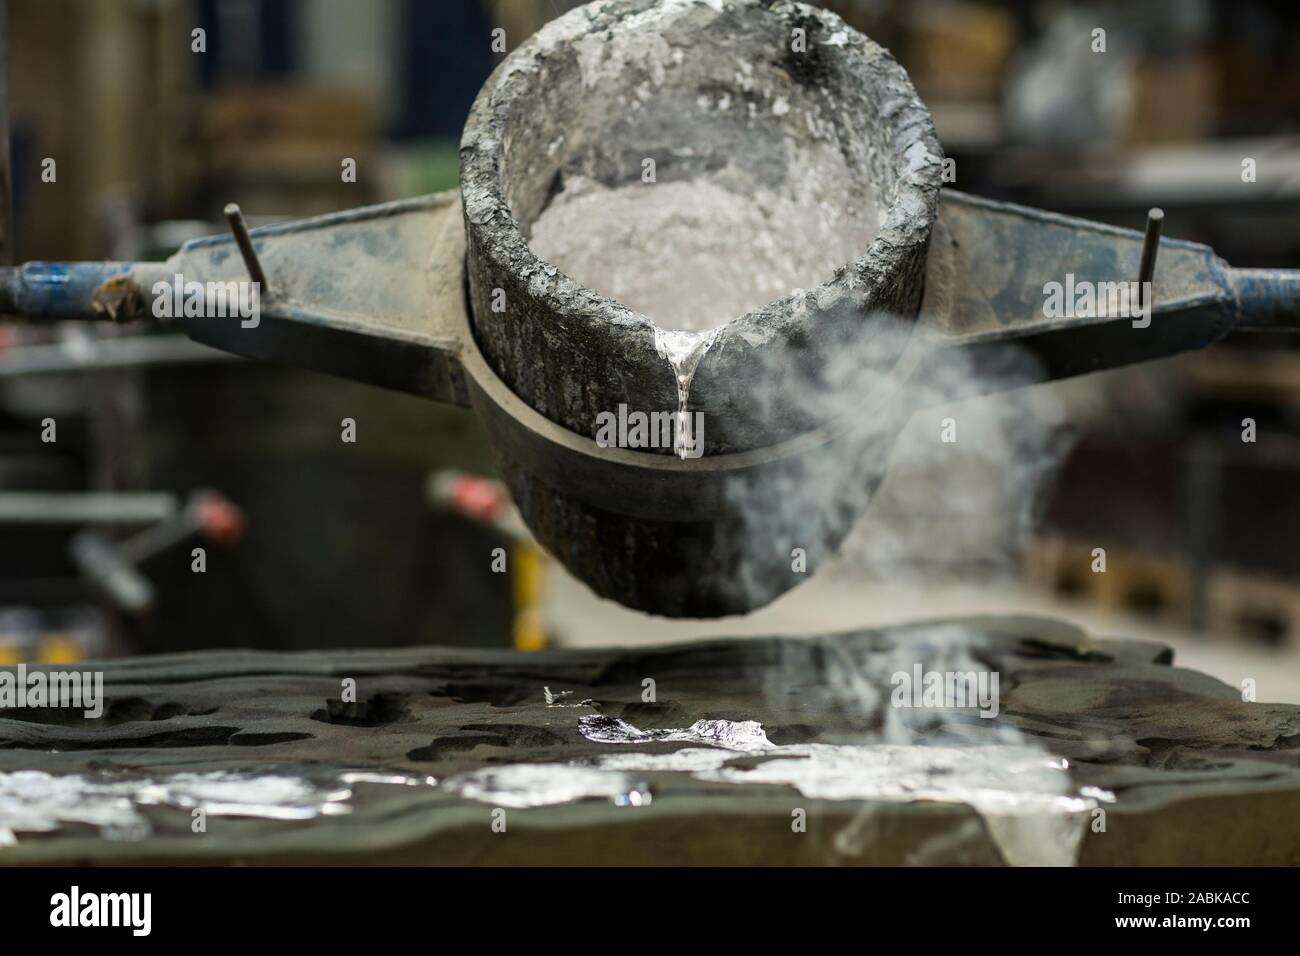 Detail of Metal casting pouring molten aluminum silver colored liquid into a mold creating smoke in a industrial envoriment, workshop space Stock Photo